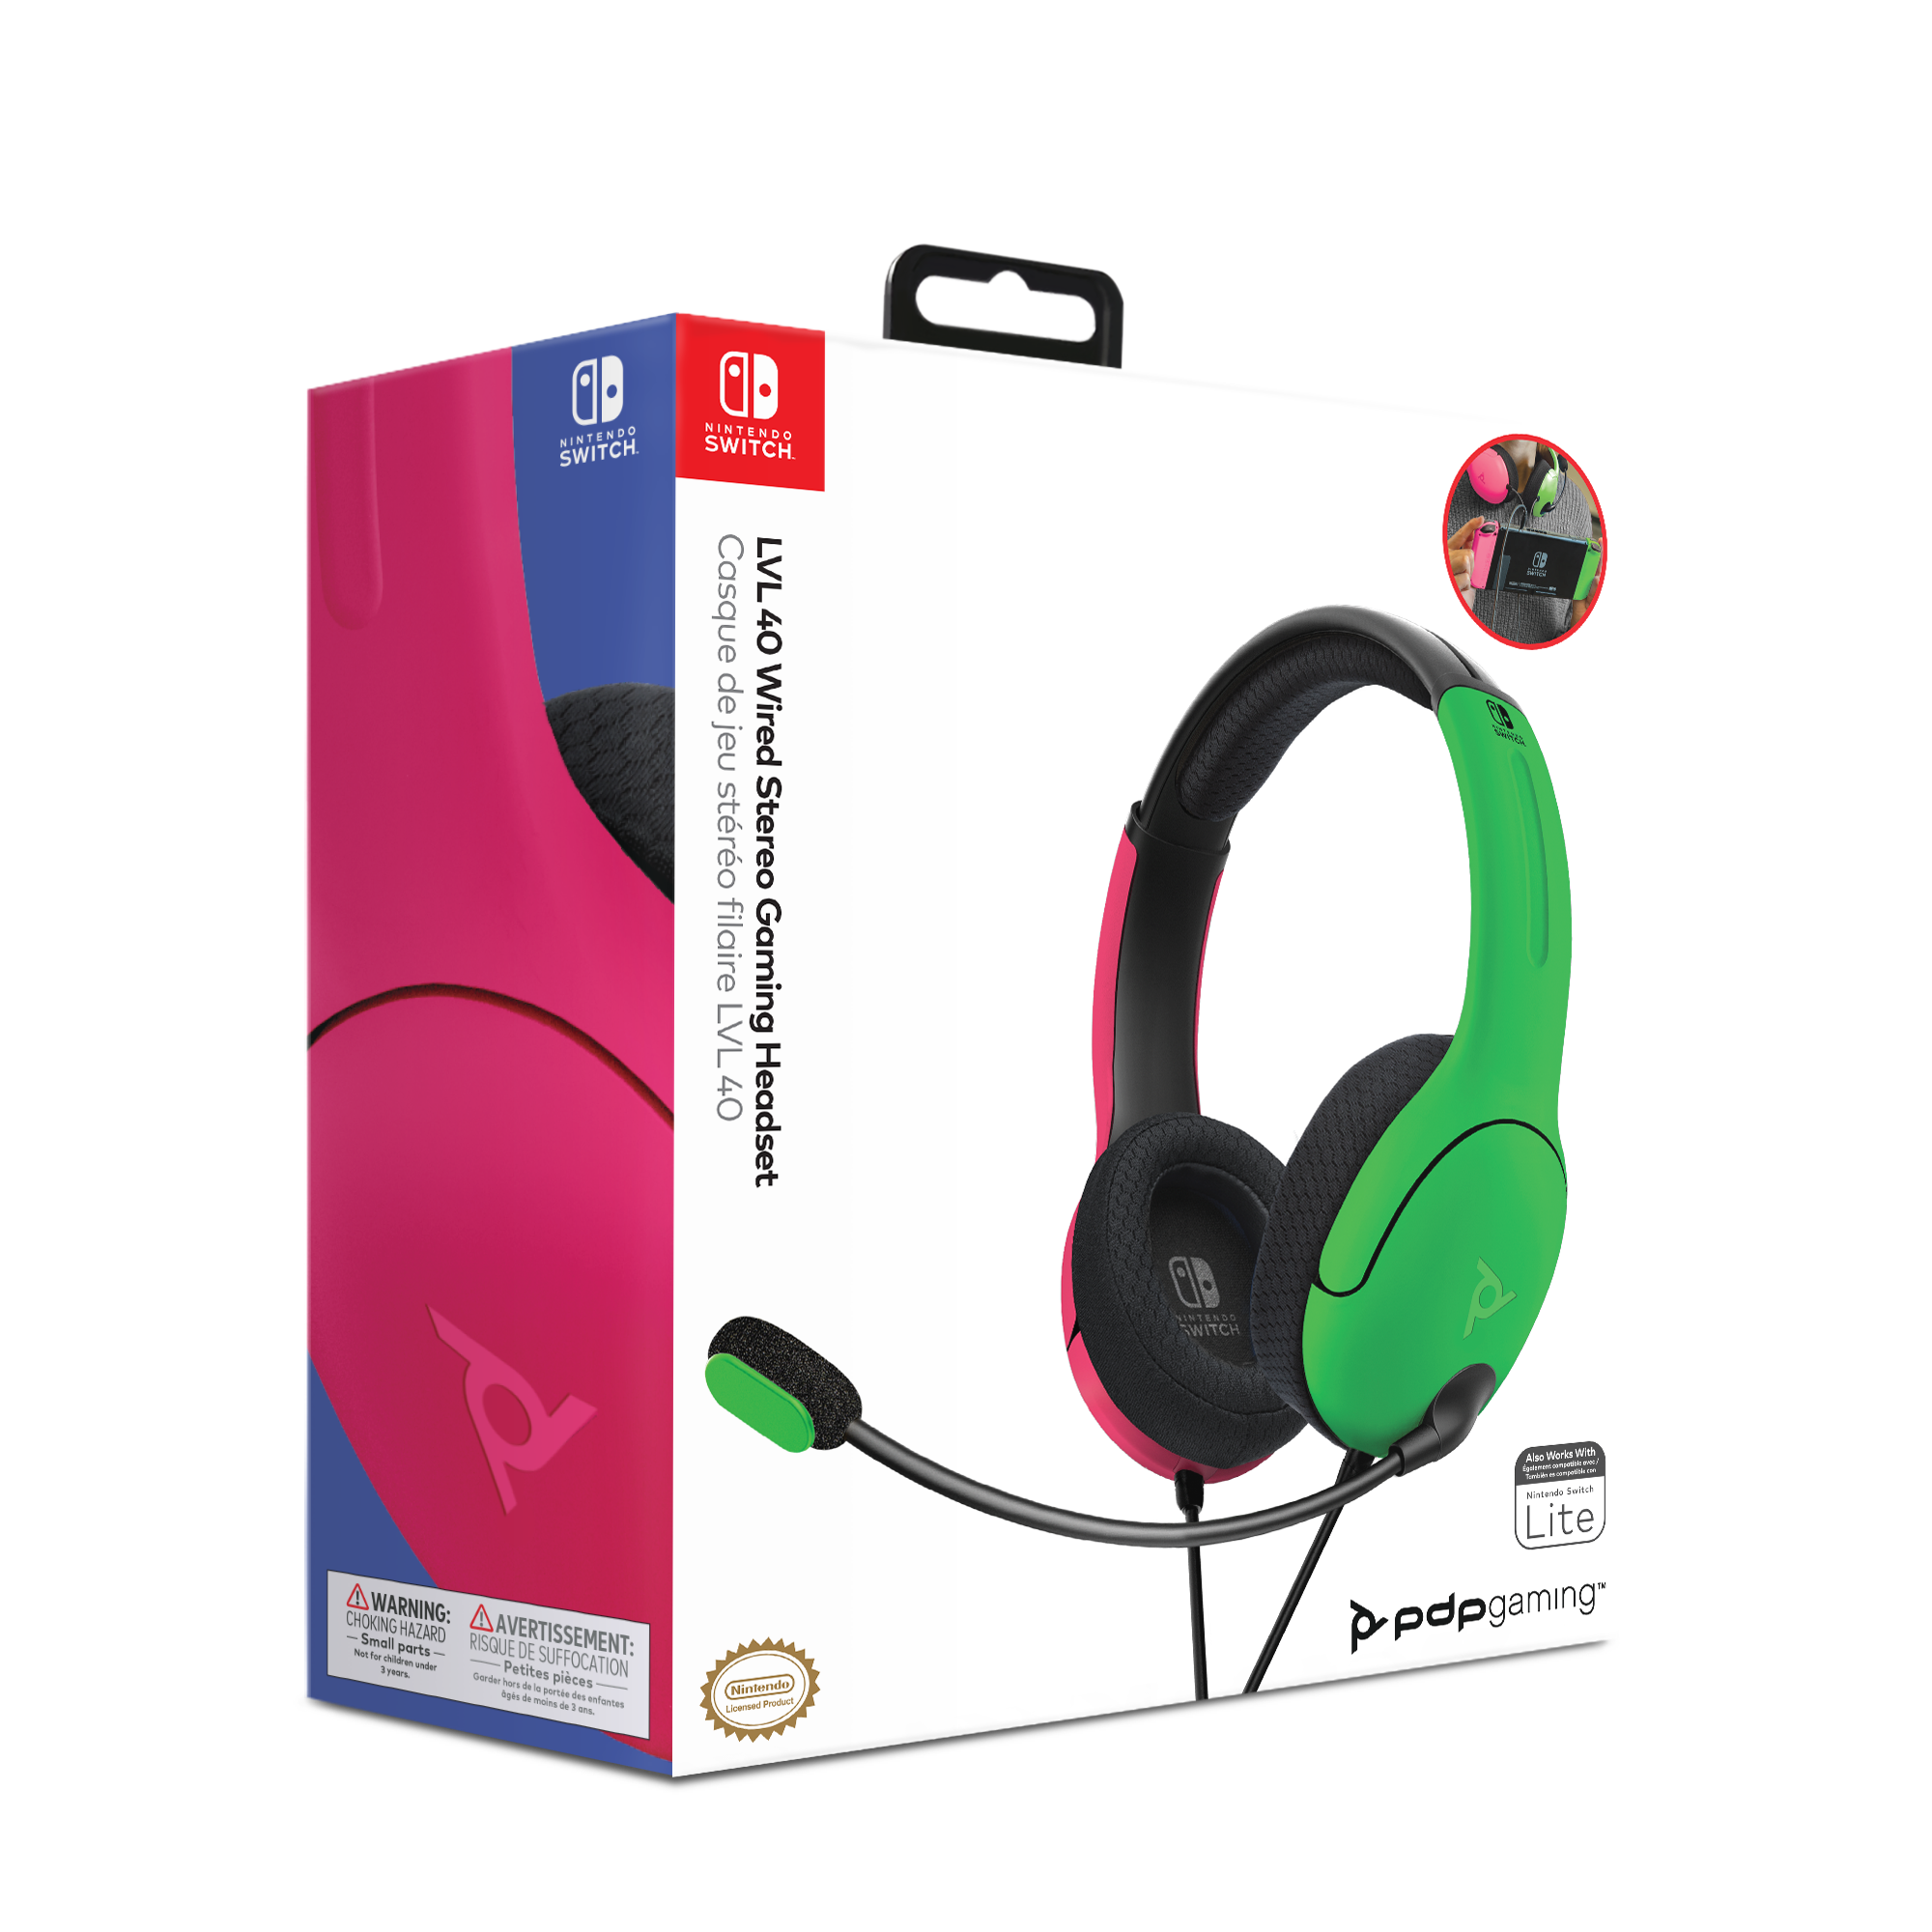 Level Up Your Game  LVL40 Wired Stereo Gaming Headset for Nintendo Switch  